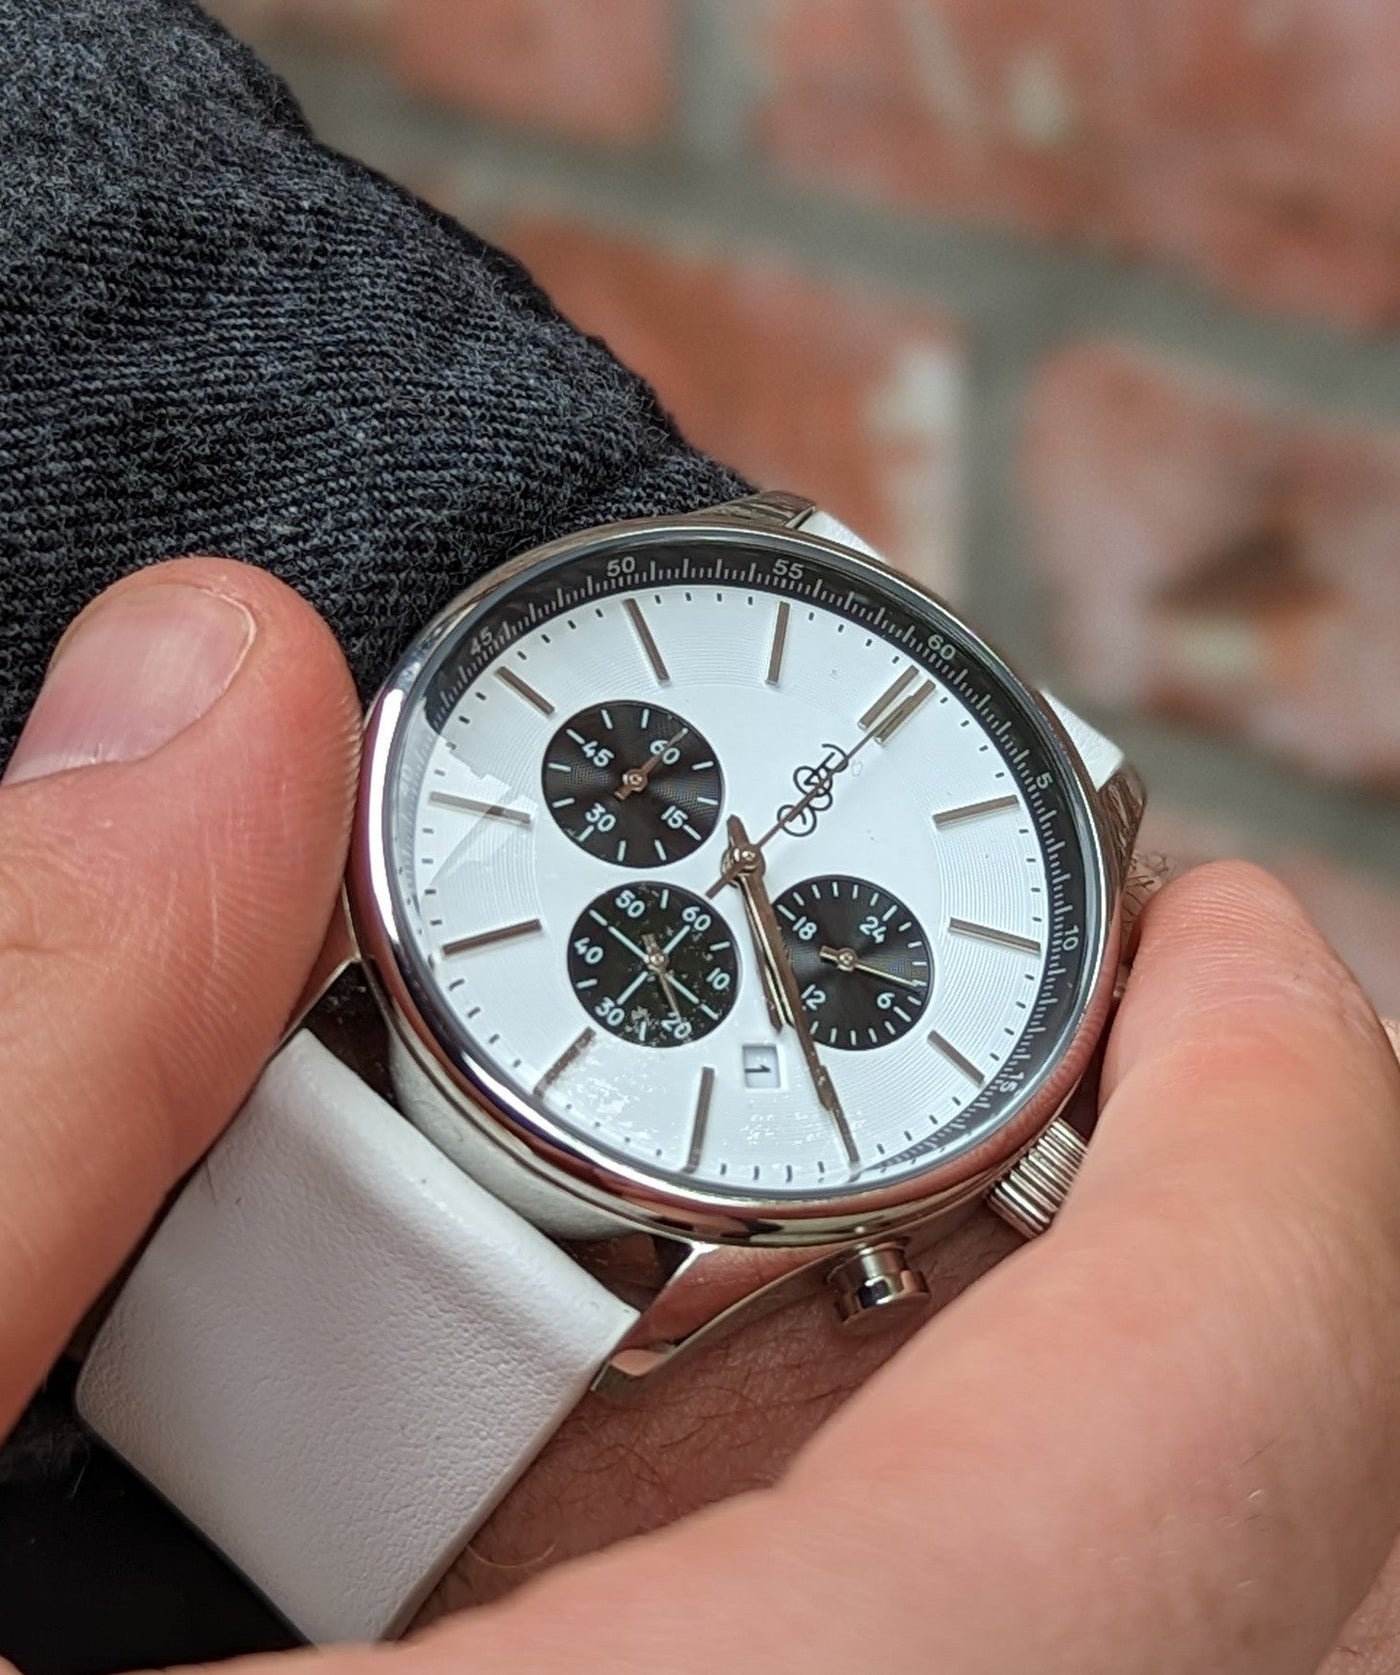 The Beyond Boring Watch Company 41mm White and Black Chronograph